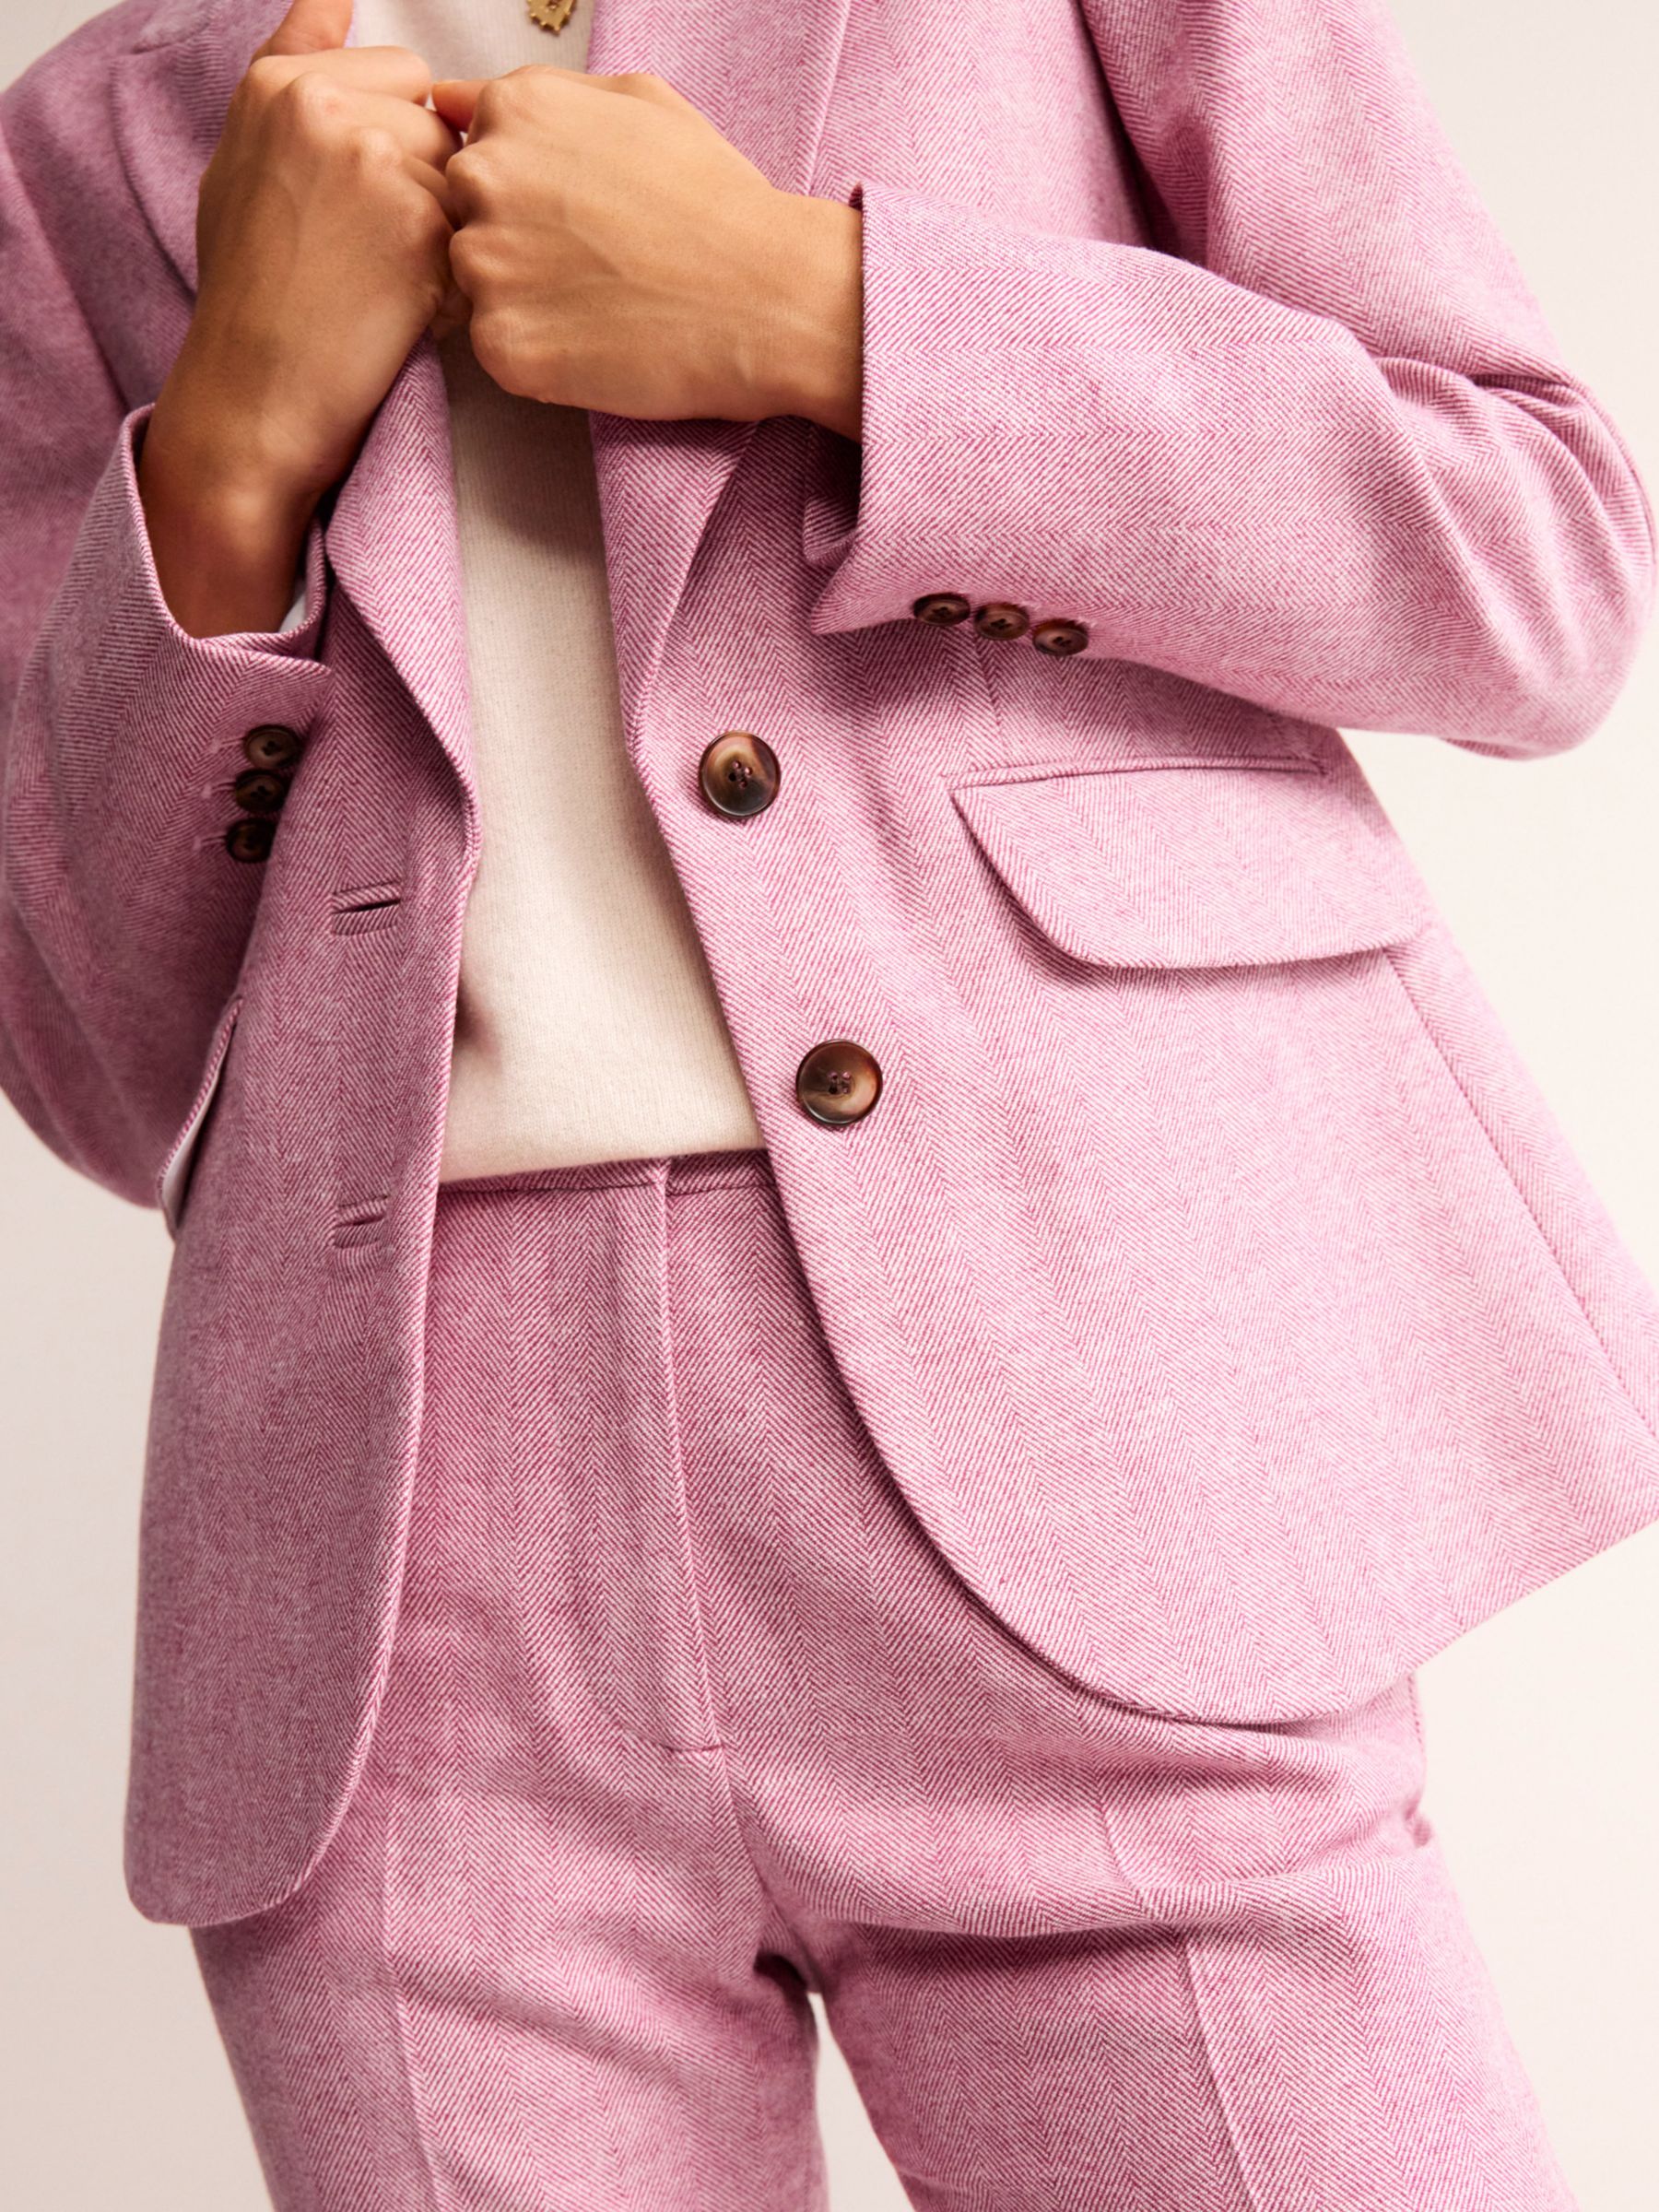 Boden's pink linen suit is perfect for spring